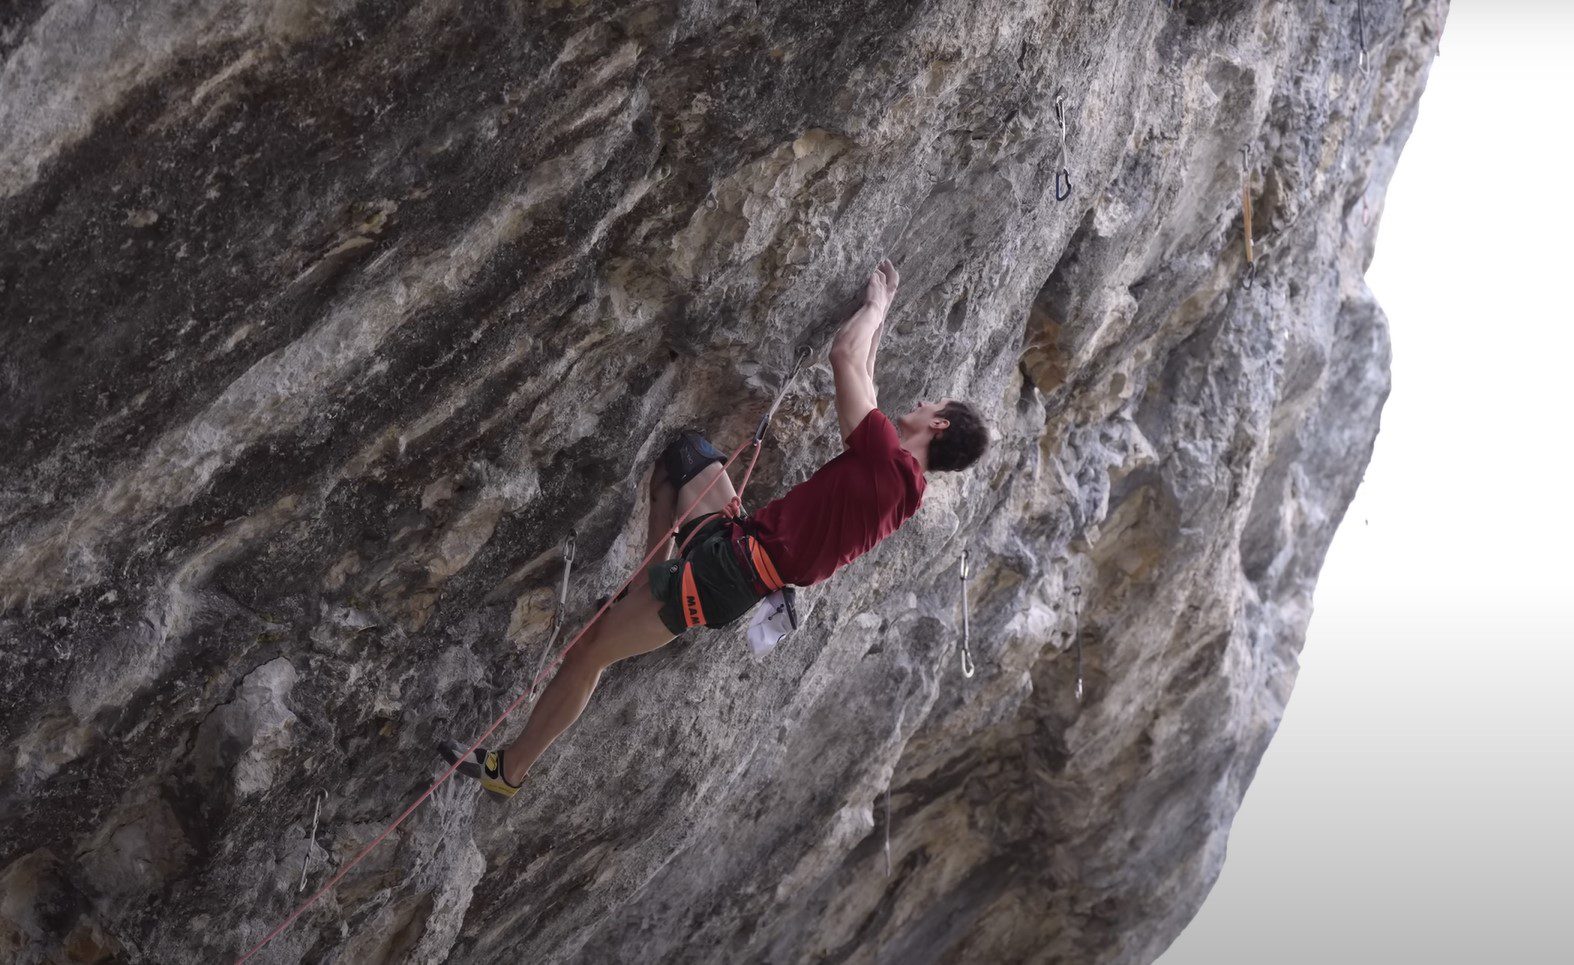 Adam Ondra Attempts to Onsight Four 5.14s in a Day